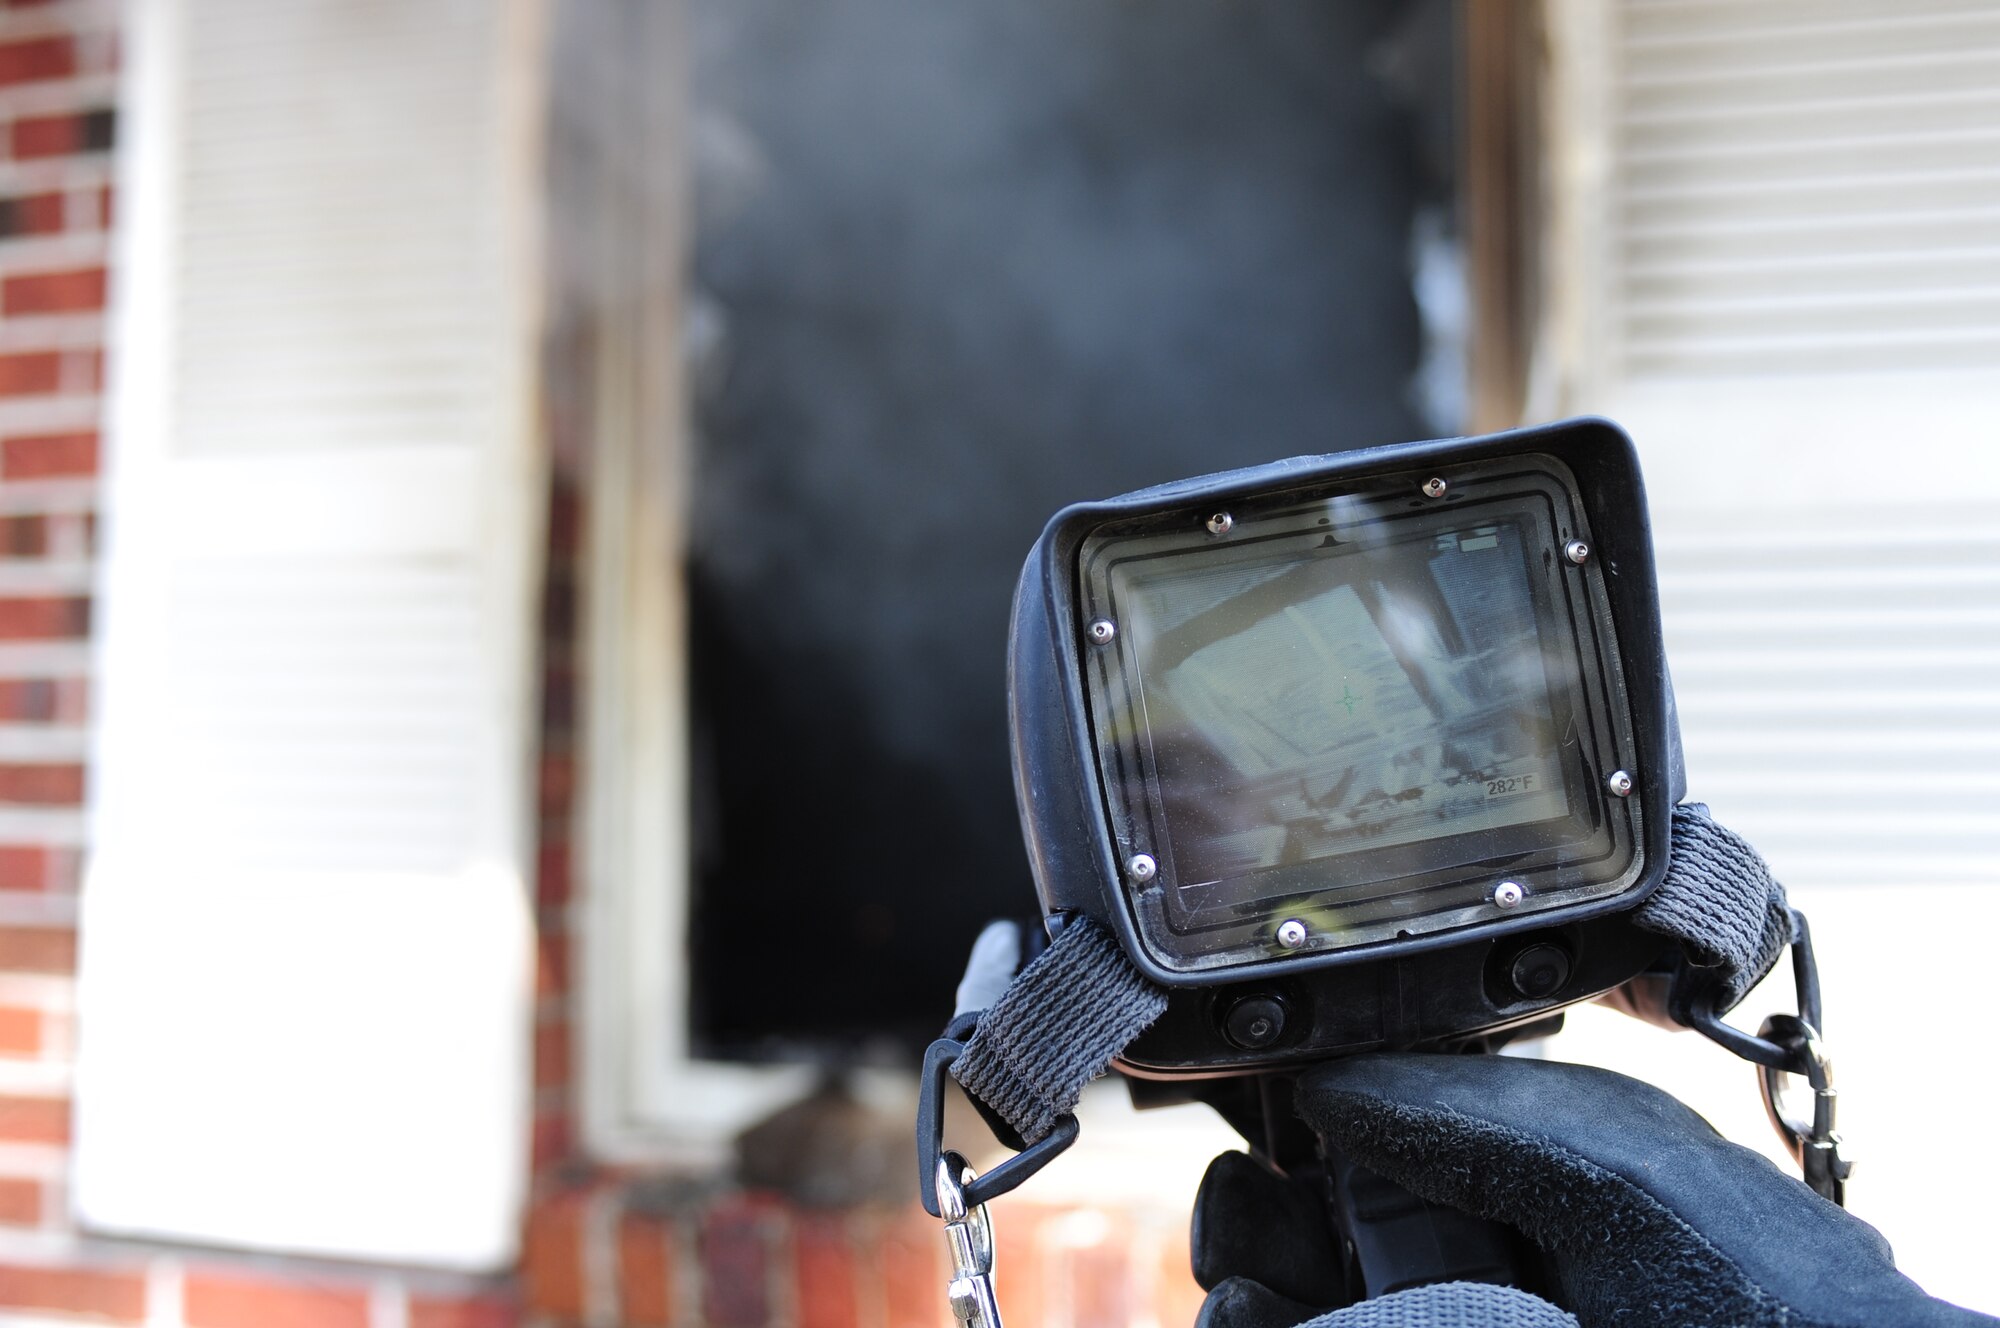 SEYMOUR JOHNSON AIR FORCE BASE, N.C. -- The fire department checks for hot spots using a Scott brand thermal imaging camera to ensure fires are not restarted by hot coals. (U.S. Air Force photo/Senior Airman Rae Perry) (RELEASED)